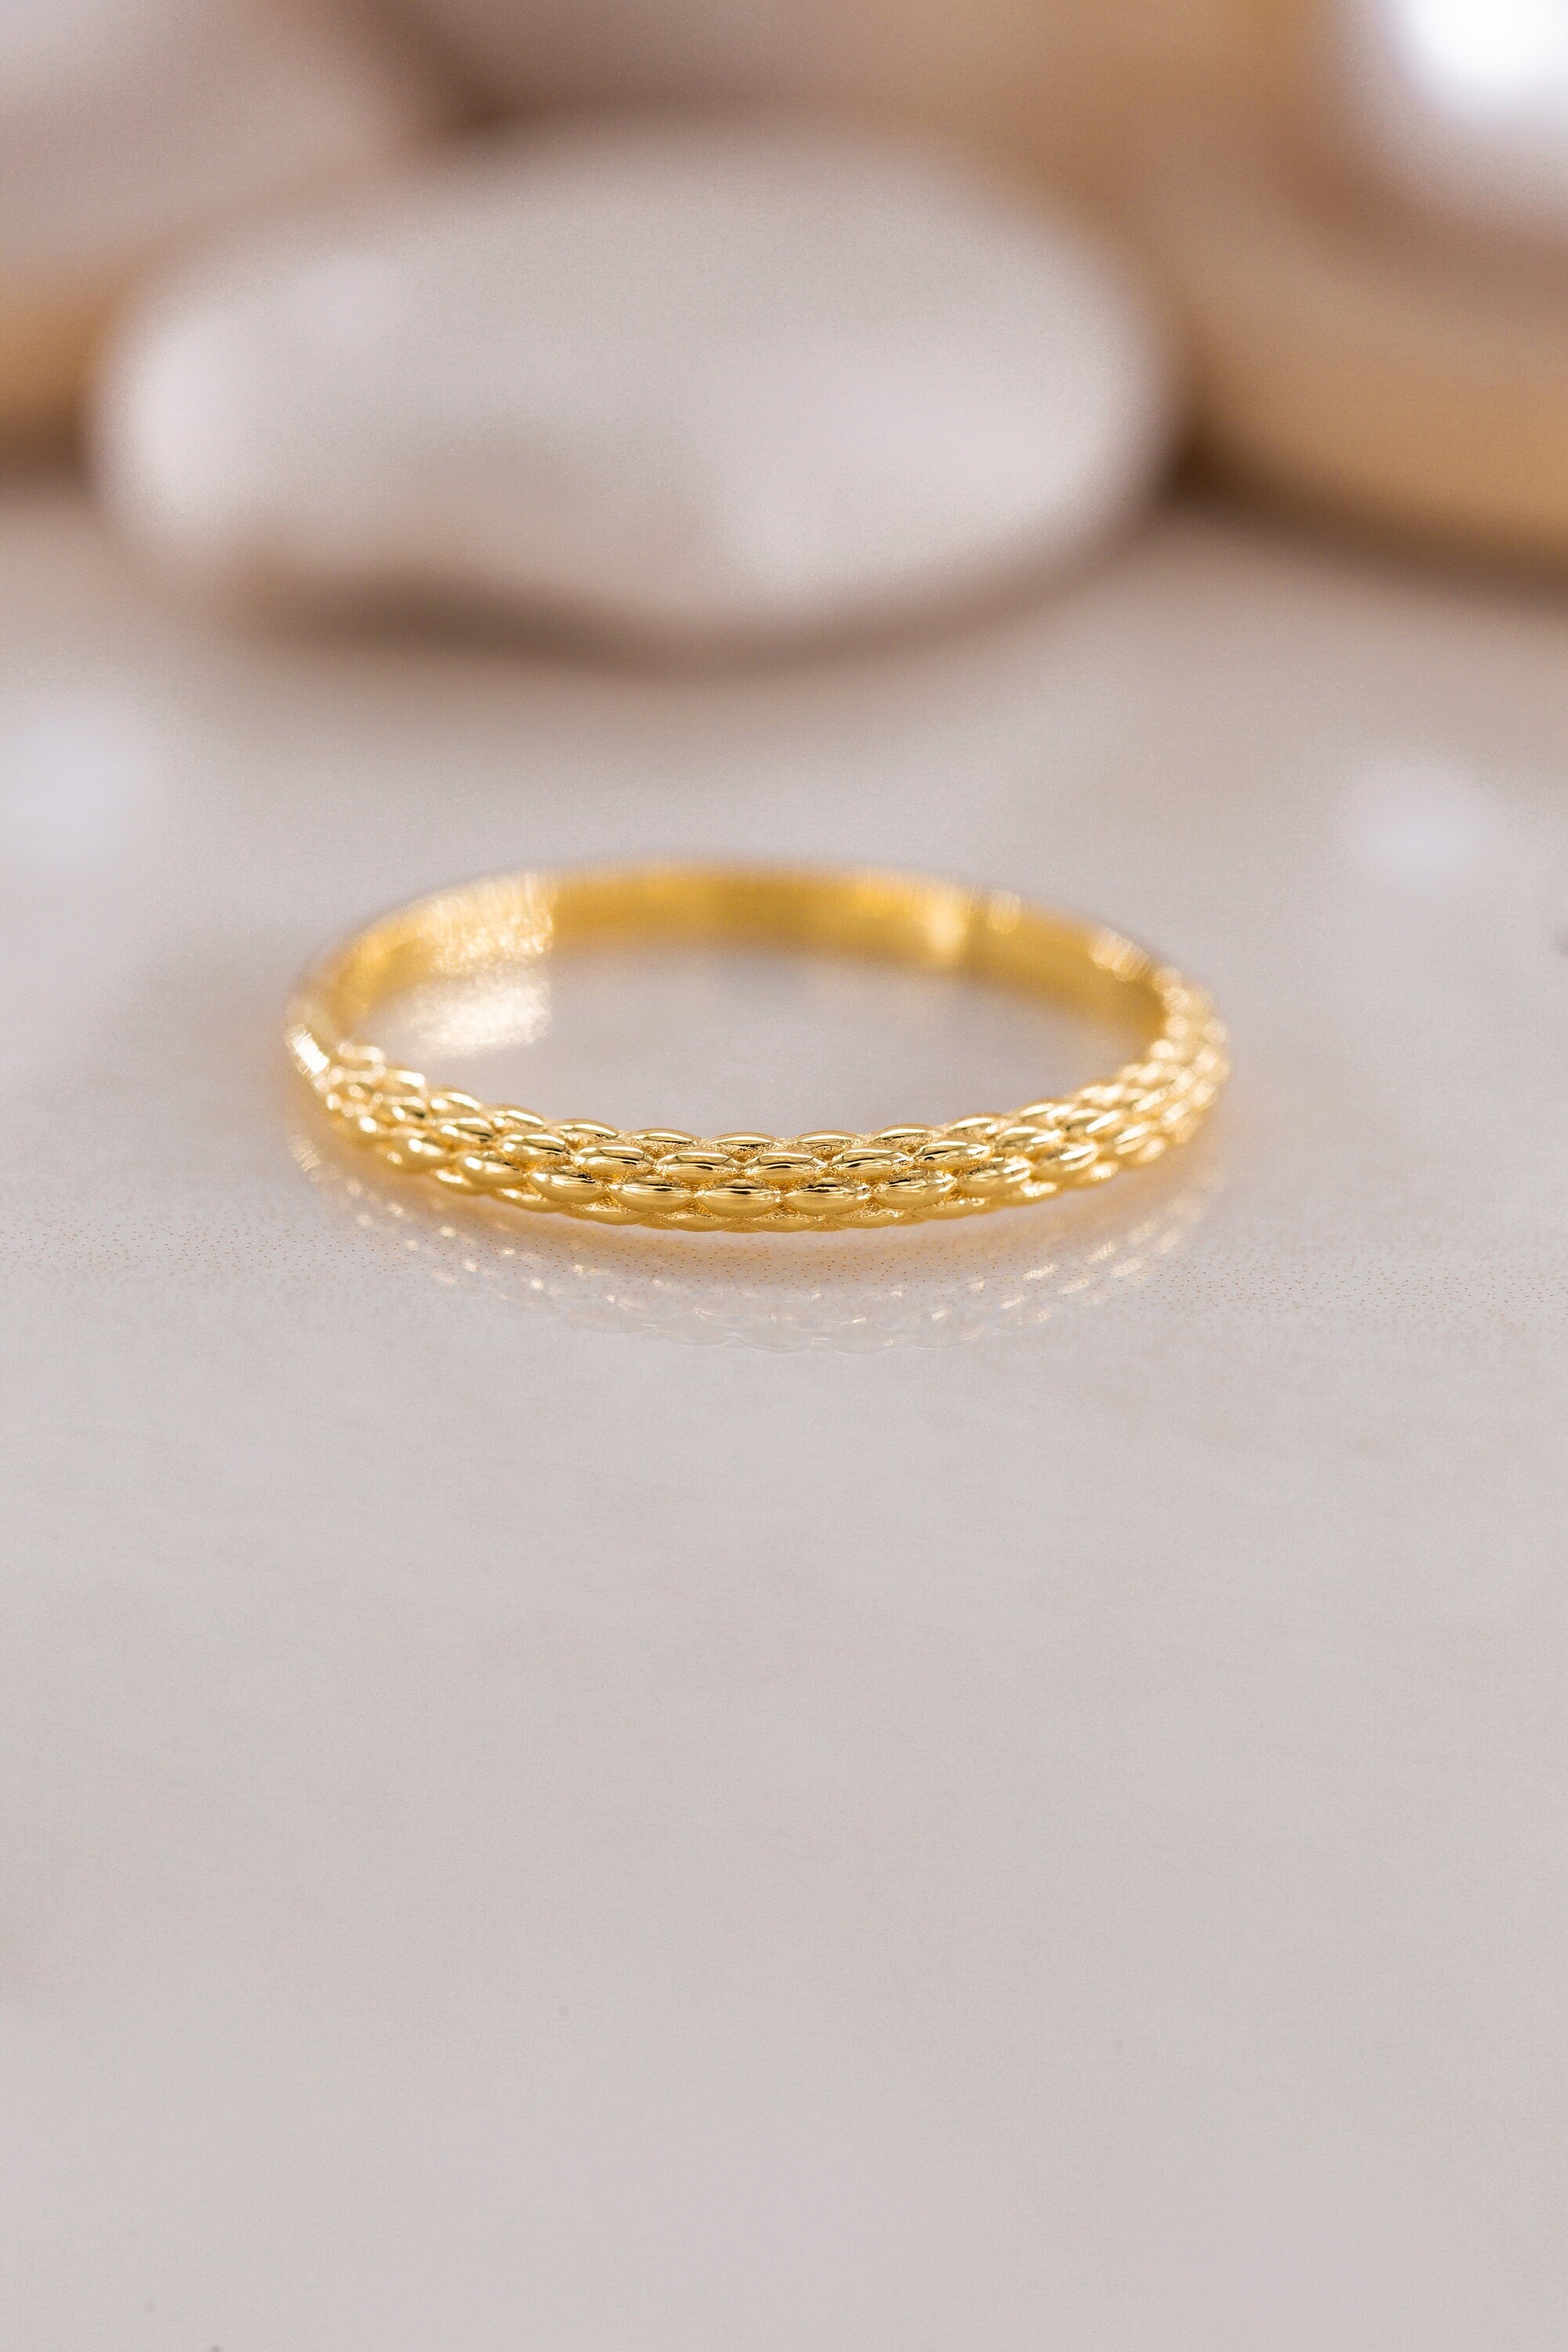 14K Golden Circle Ring, Golden Circle Design Ring, Promise Ring, Golden Ring Gift For Her, Handmade Circle Ring, Mother Day Jewelry